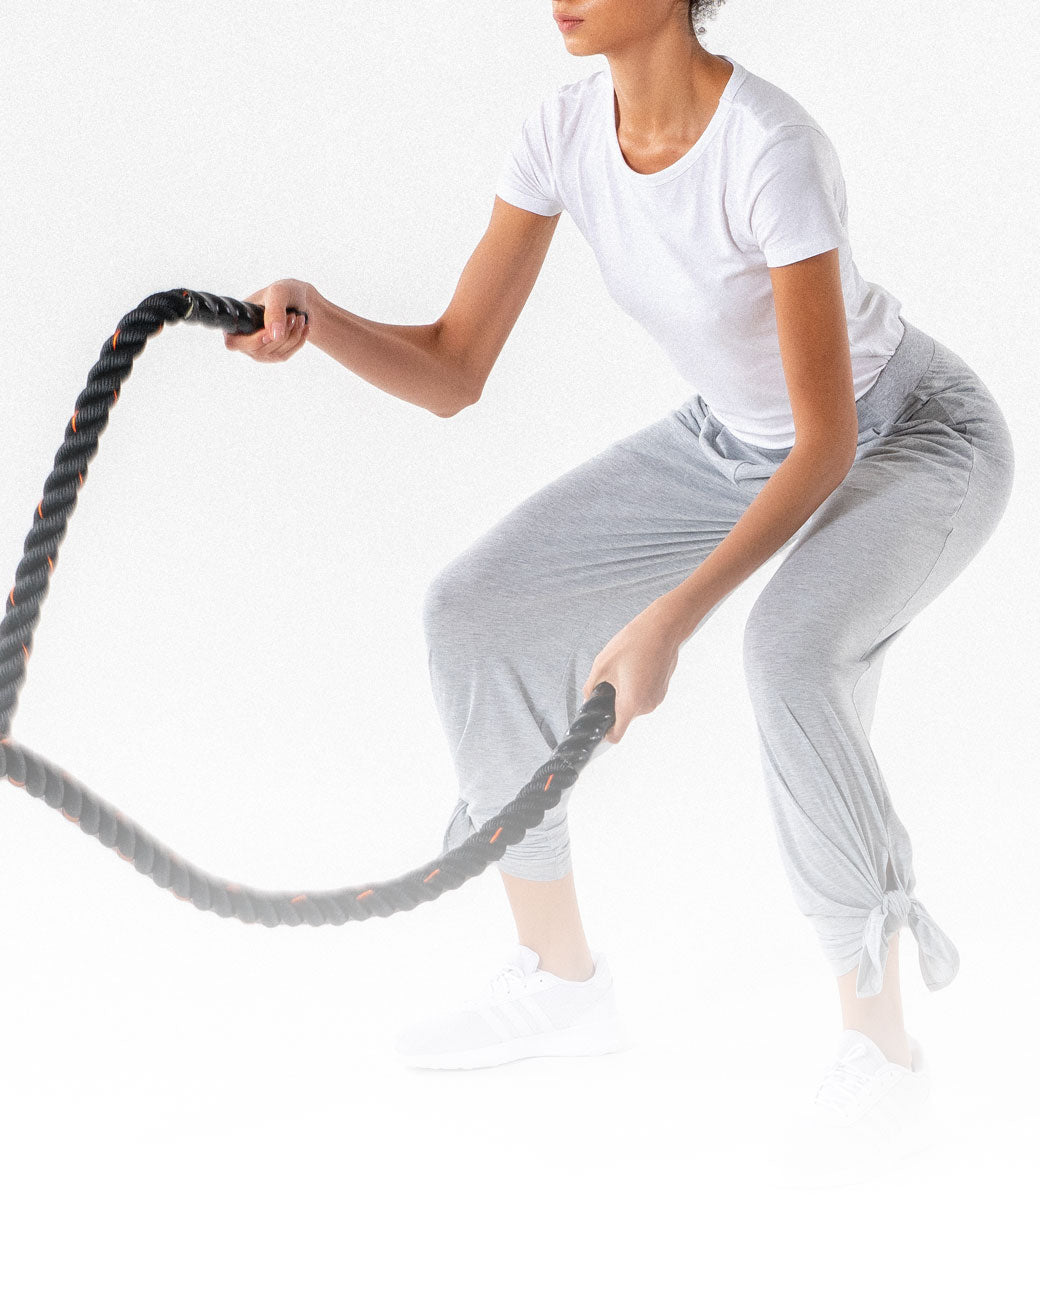 A female exercising with ropes while wearing a light grey Swift Wide-Leg Sweatpant, a modest activewear sweatpant from Veil Garments.